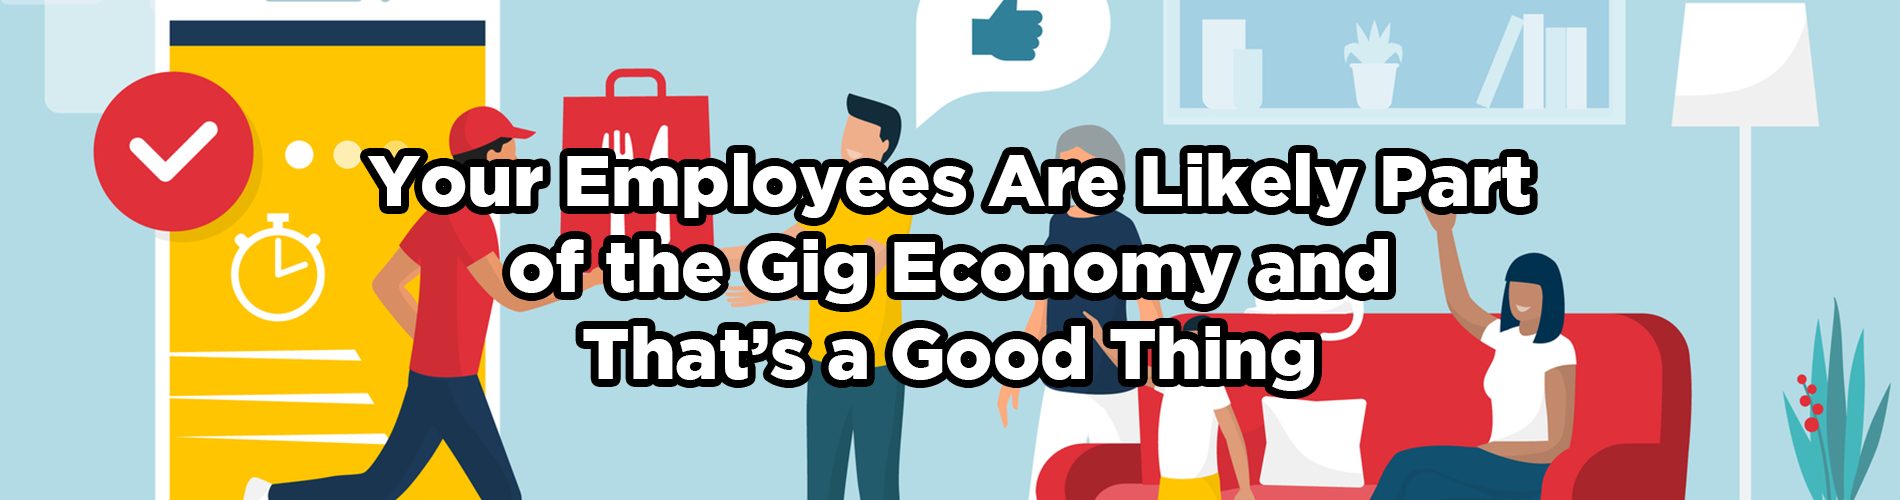 Your Employees Part of the Gig Economy